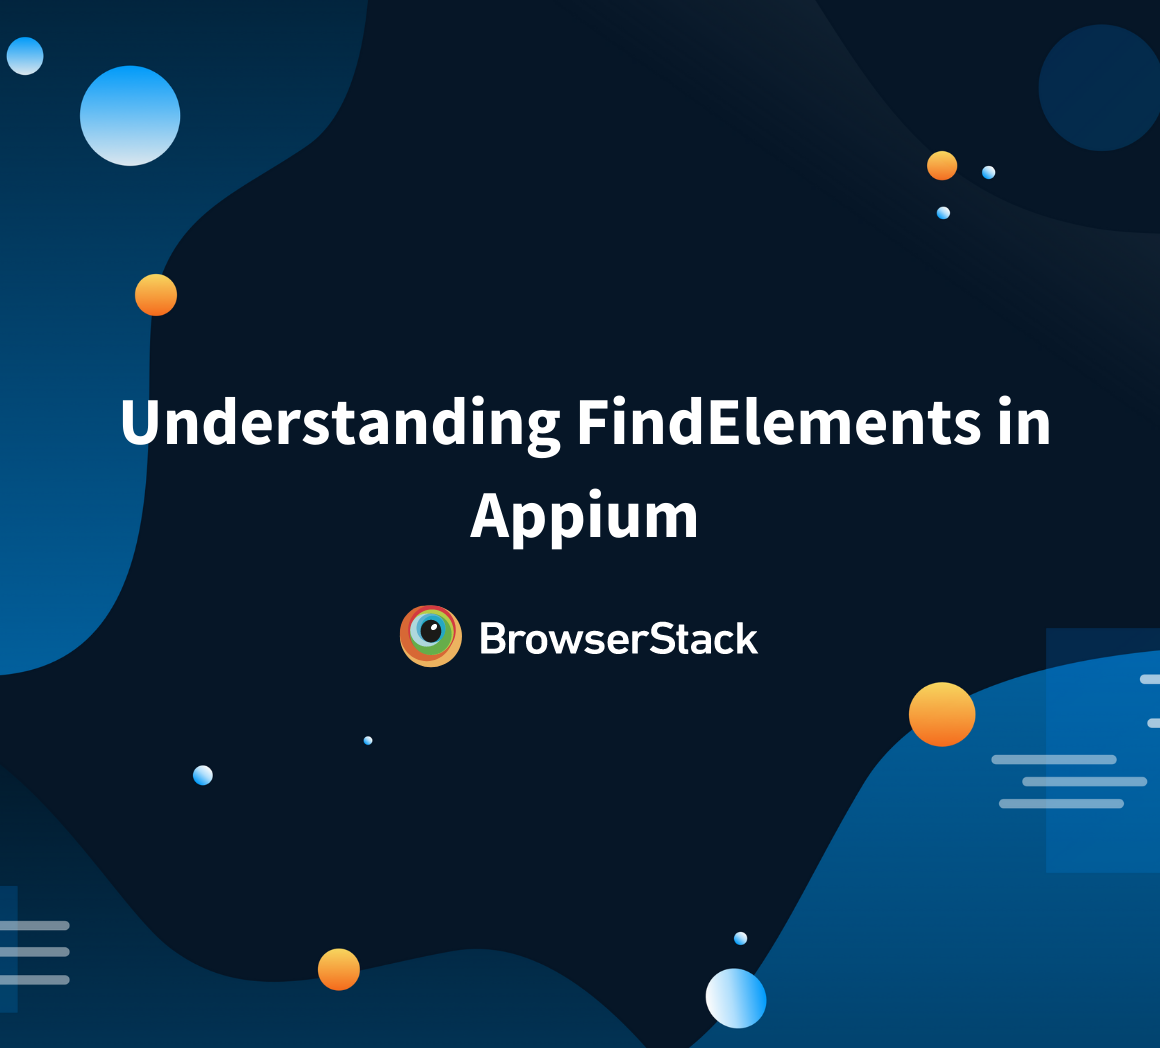 findelement and findelements in Appium